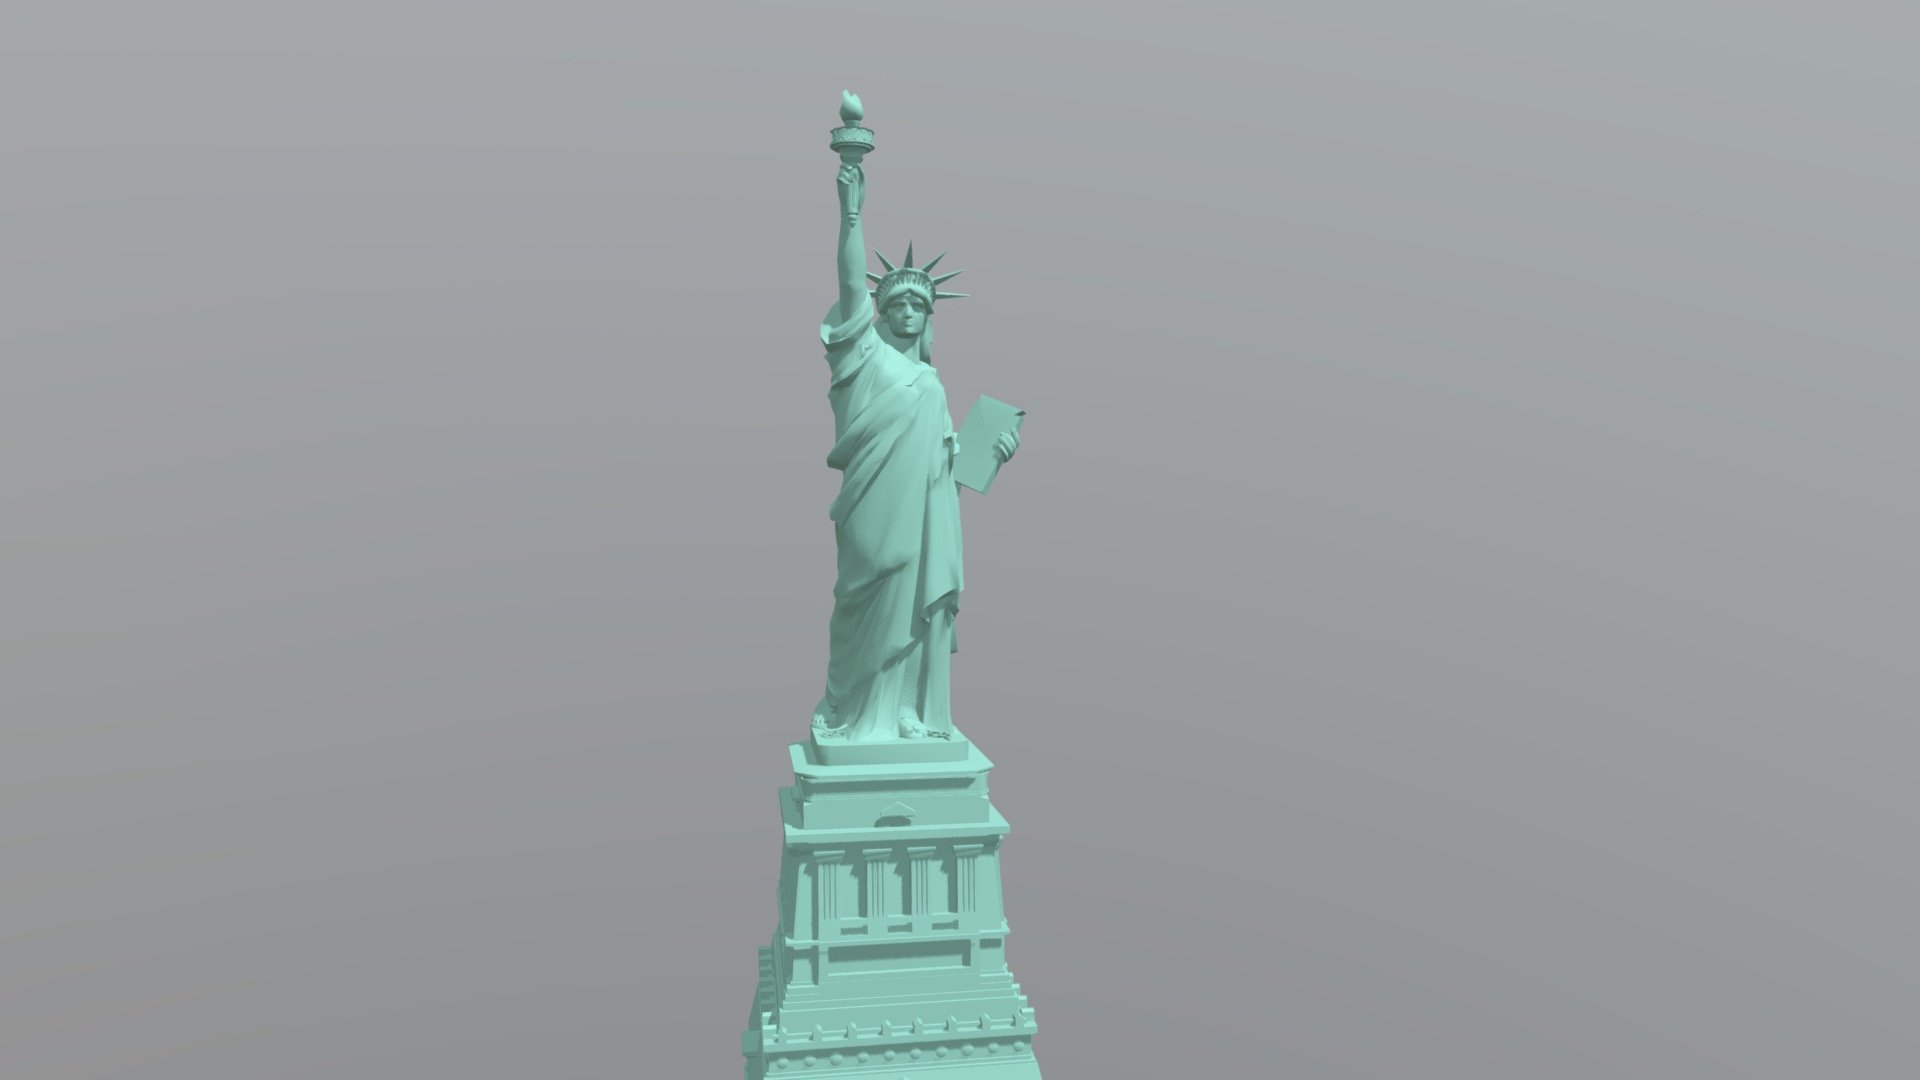 The statue of liberty - 3D model by llllline.